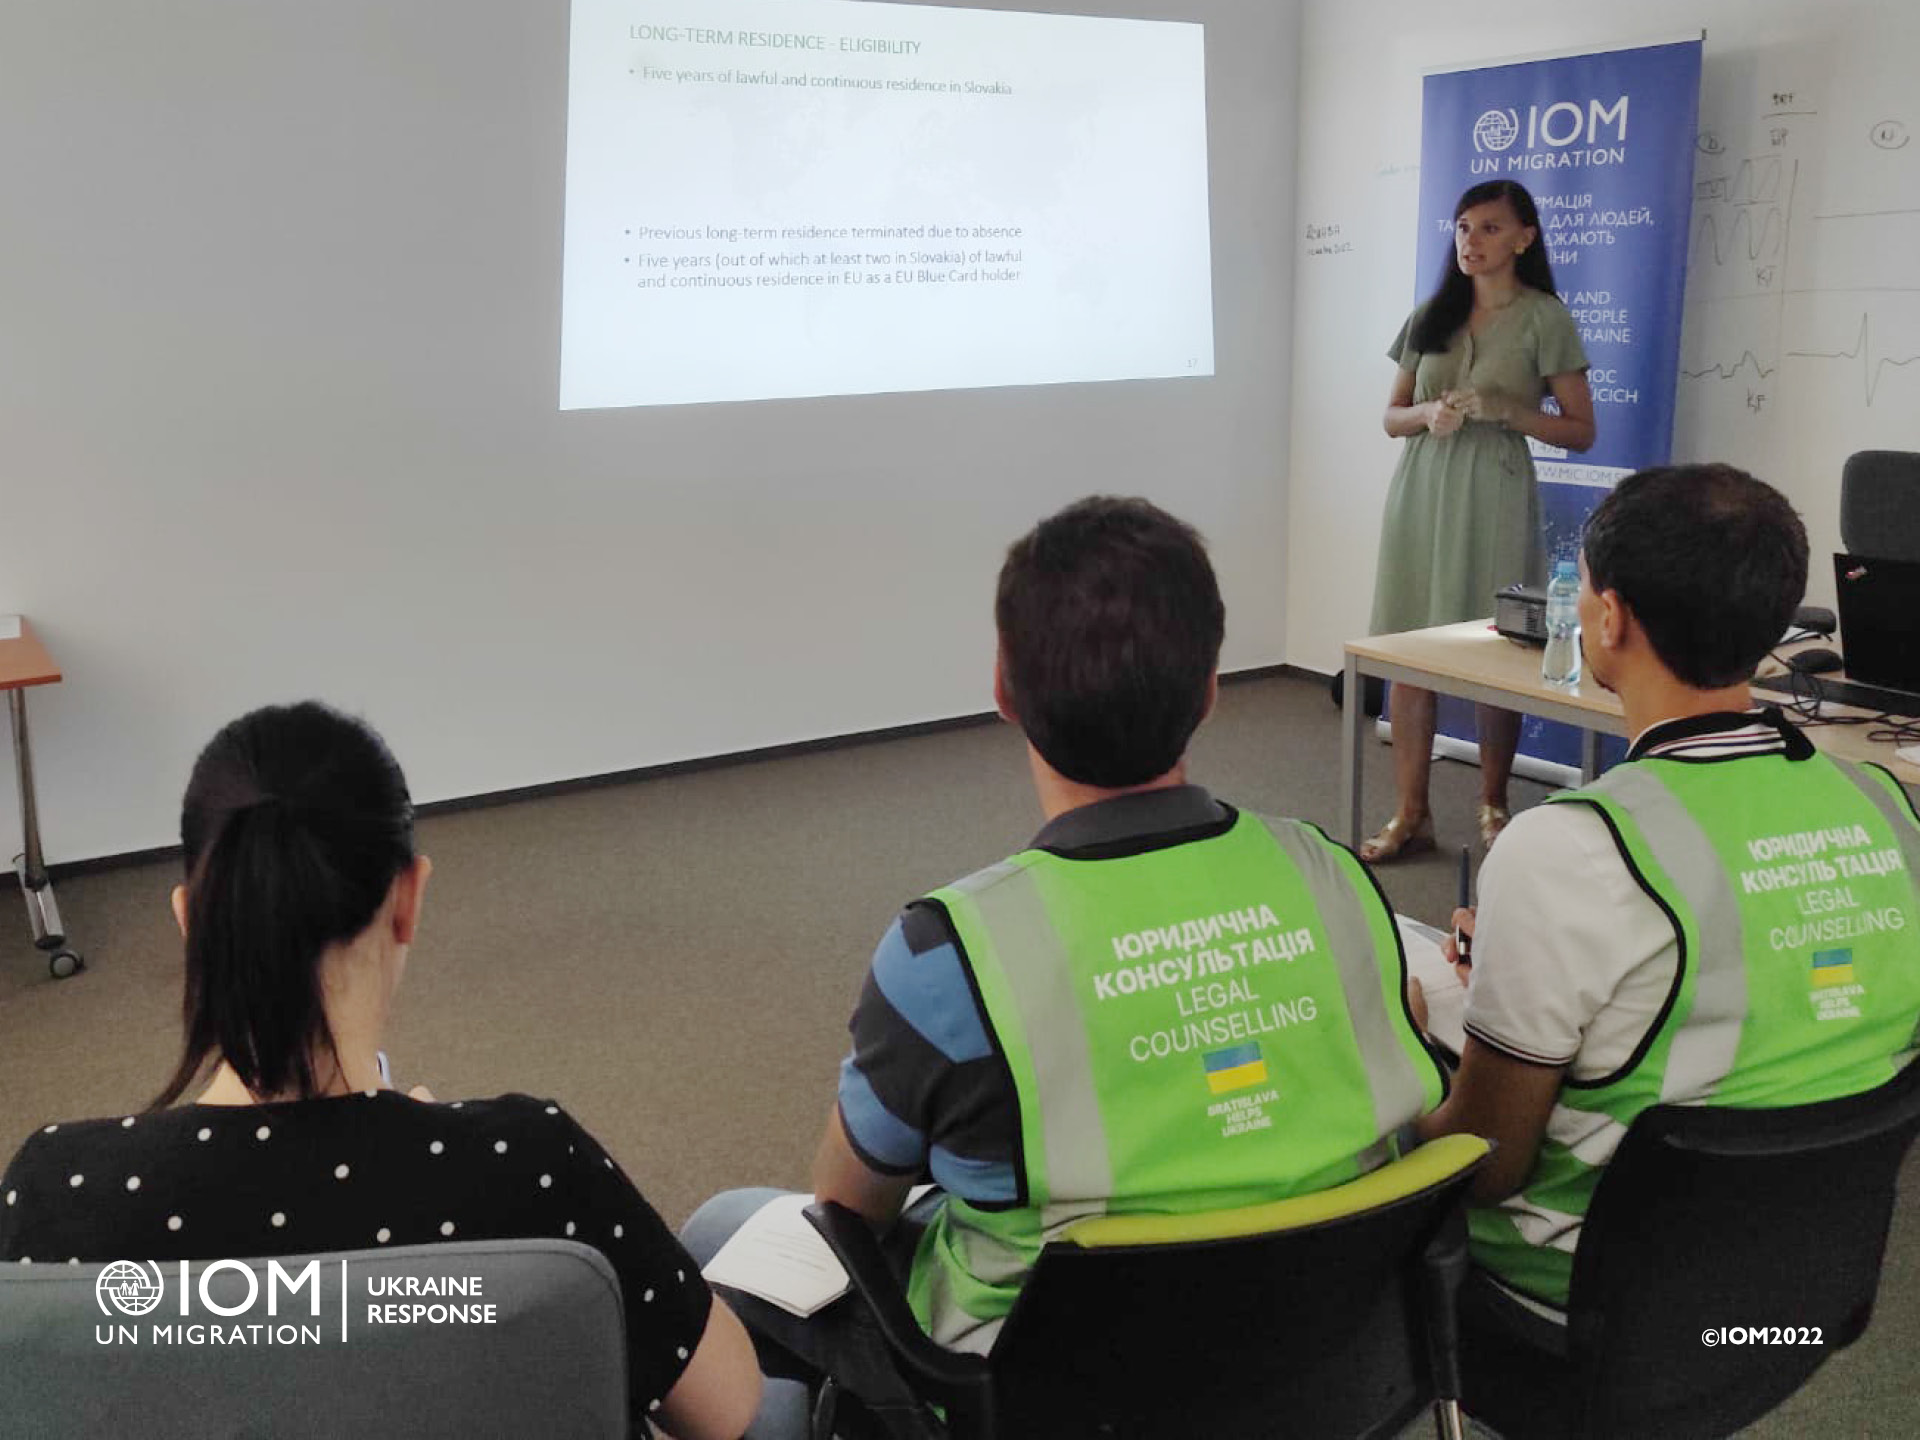 Training was part of a series of IOM trainings for lawyers and employees of HRL assisting people from Ukraine. Photo © International Organization for Migration (IOM) 2022.